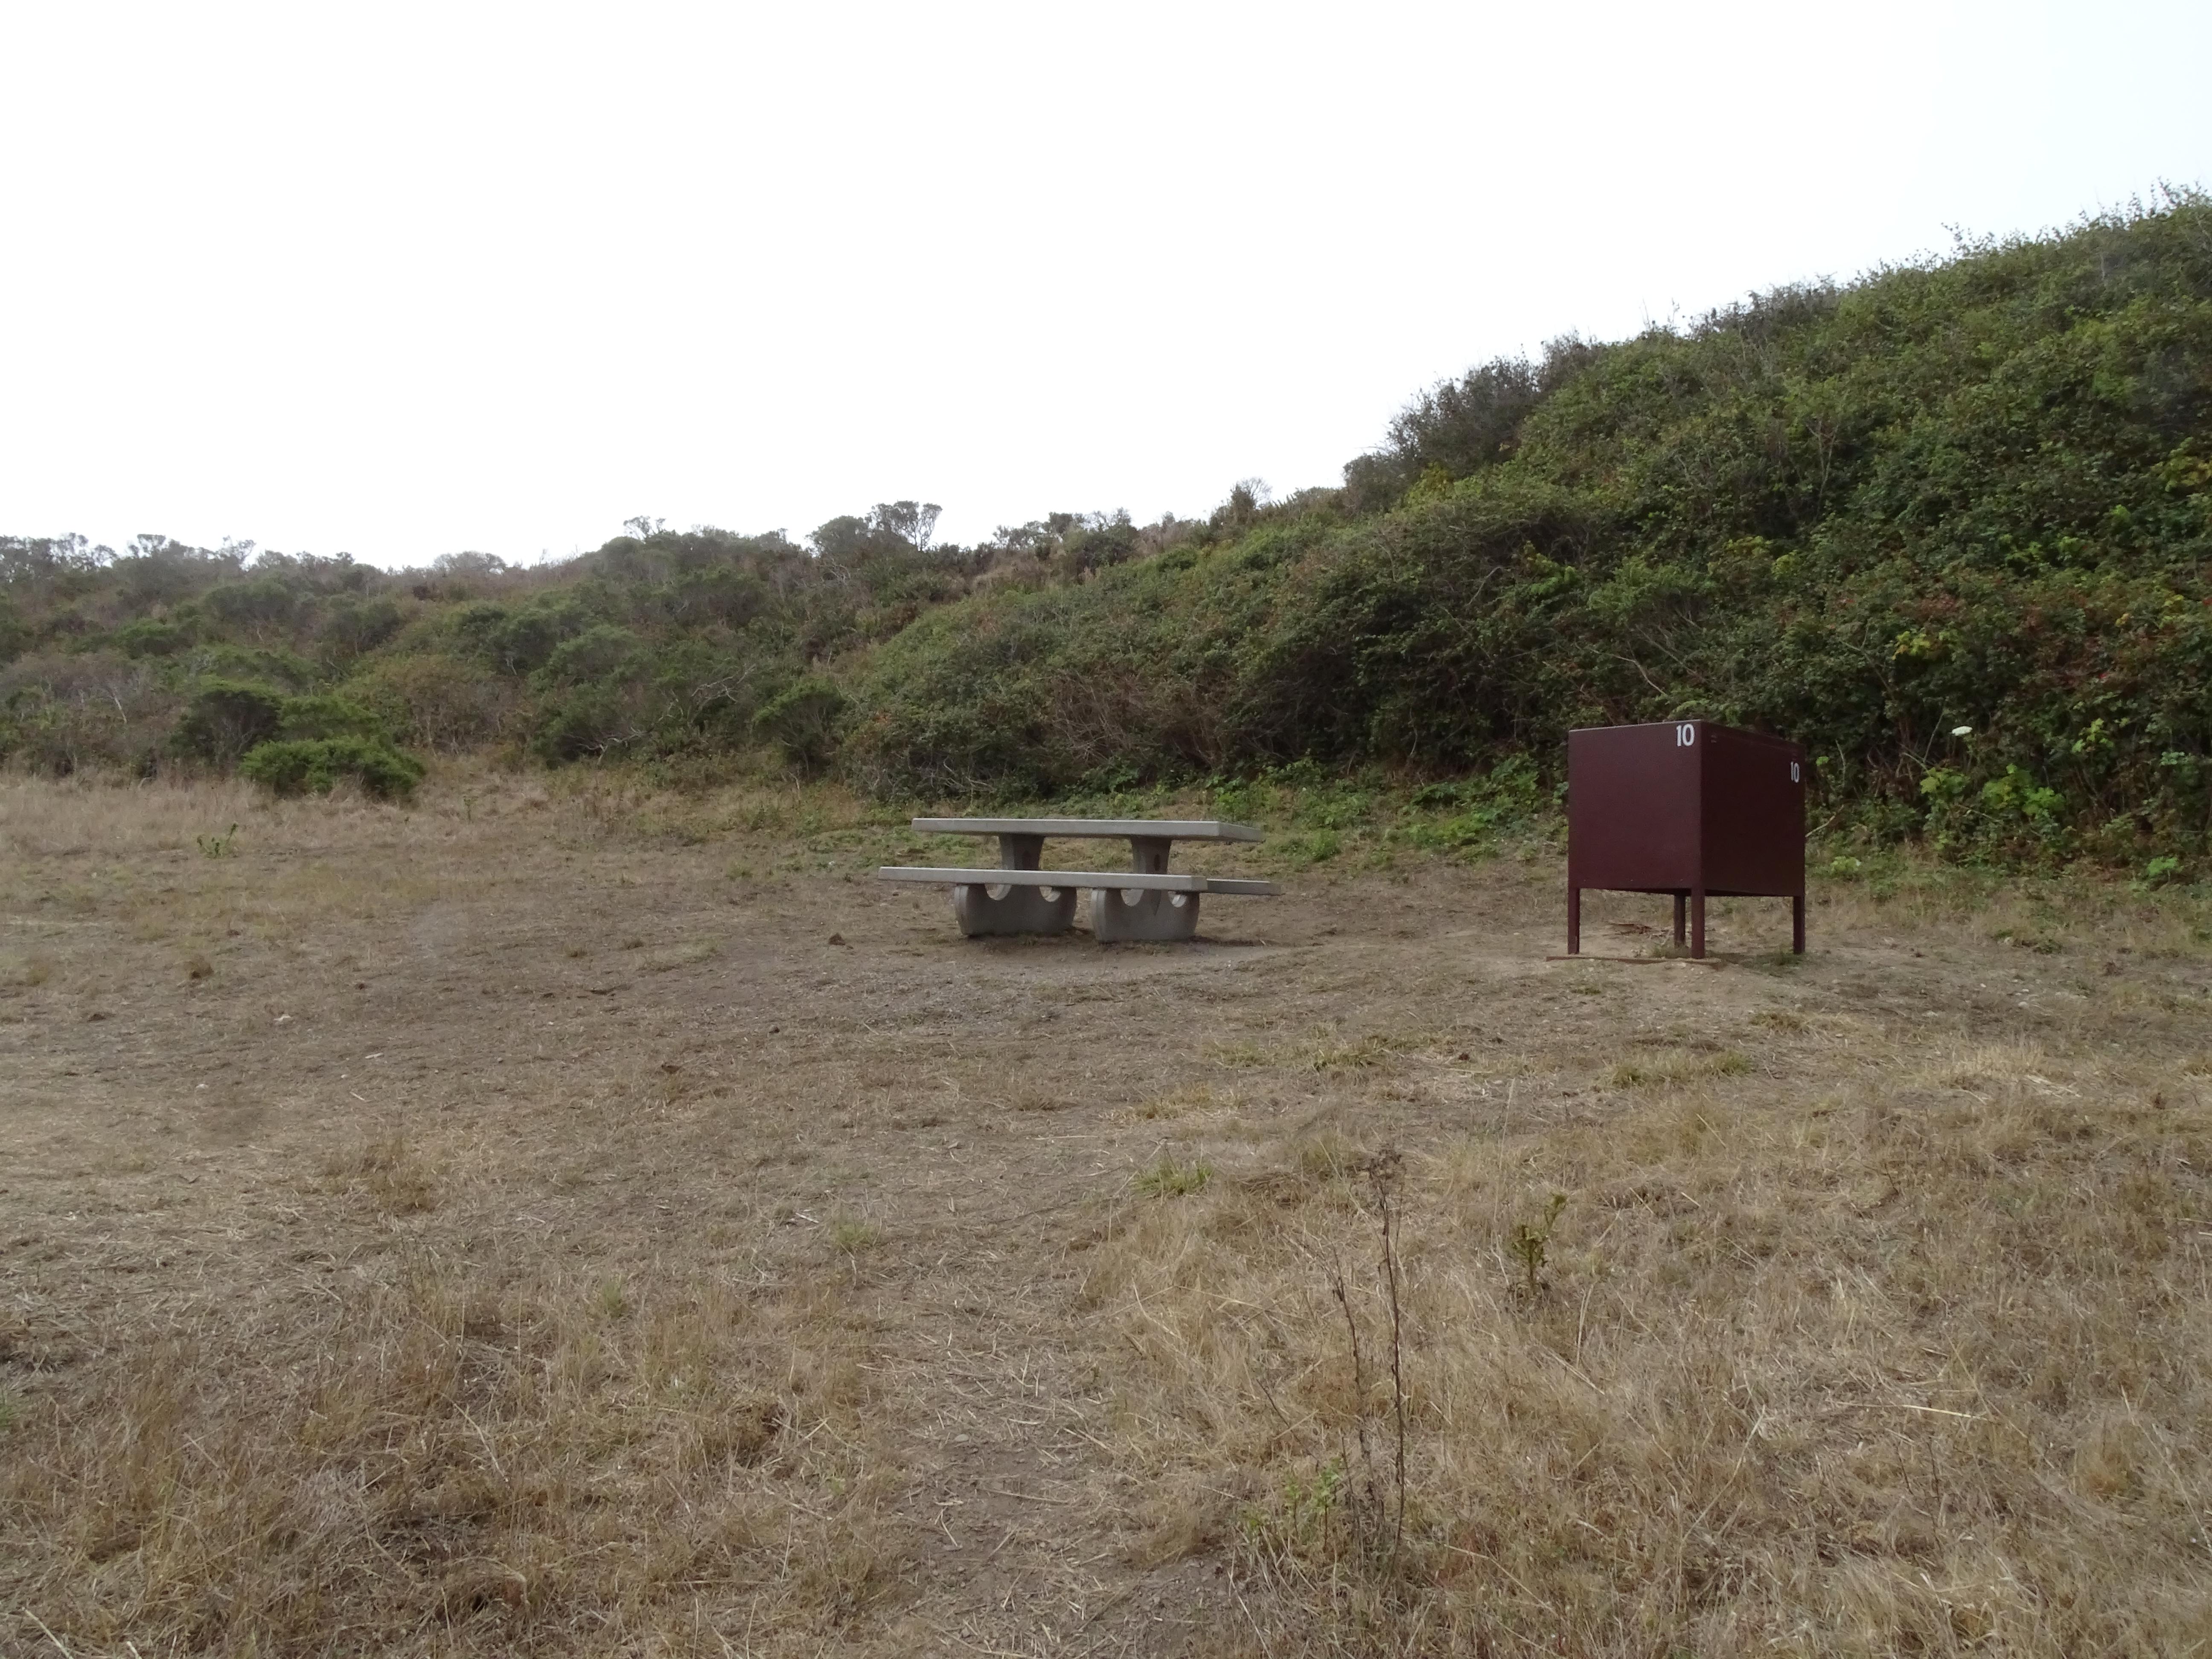 A campsite containing a picnic table and a food storage locker at the edge of a shrub-covered hill.